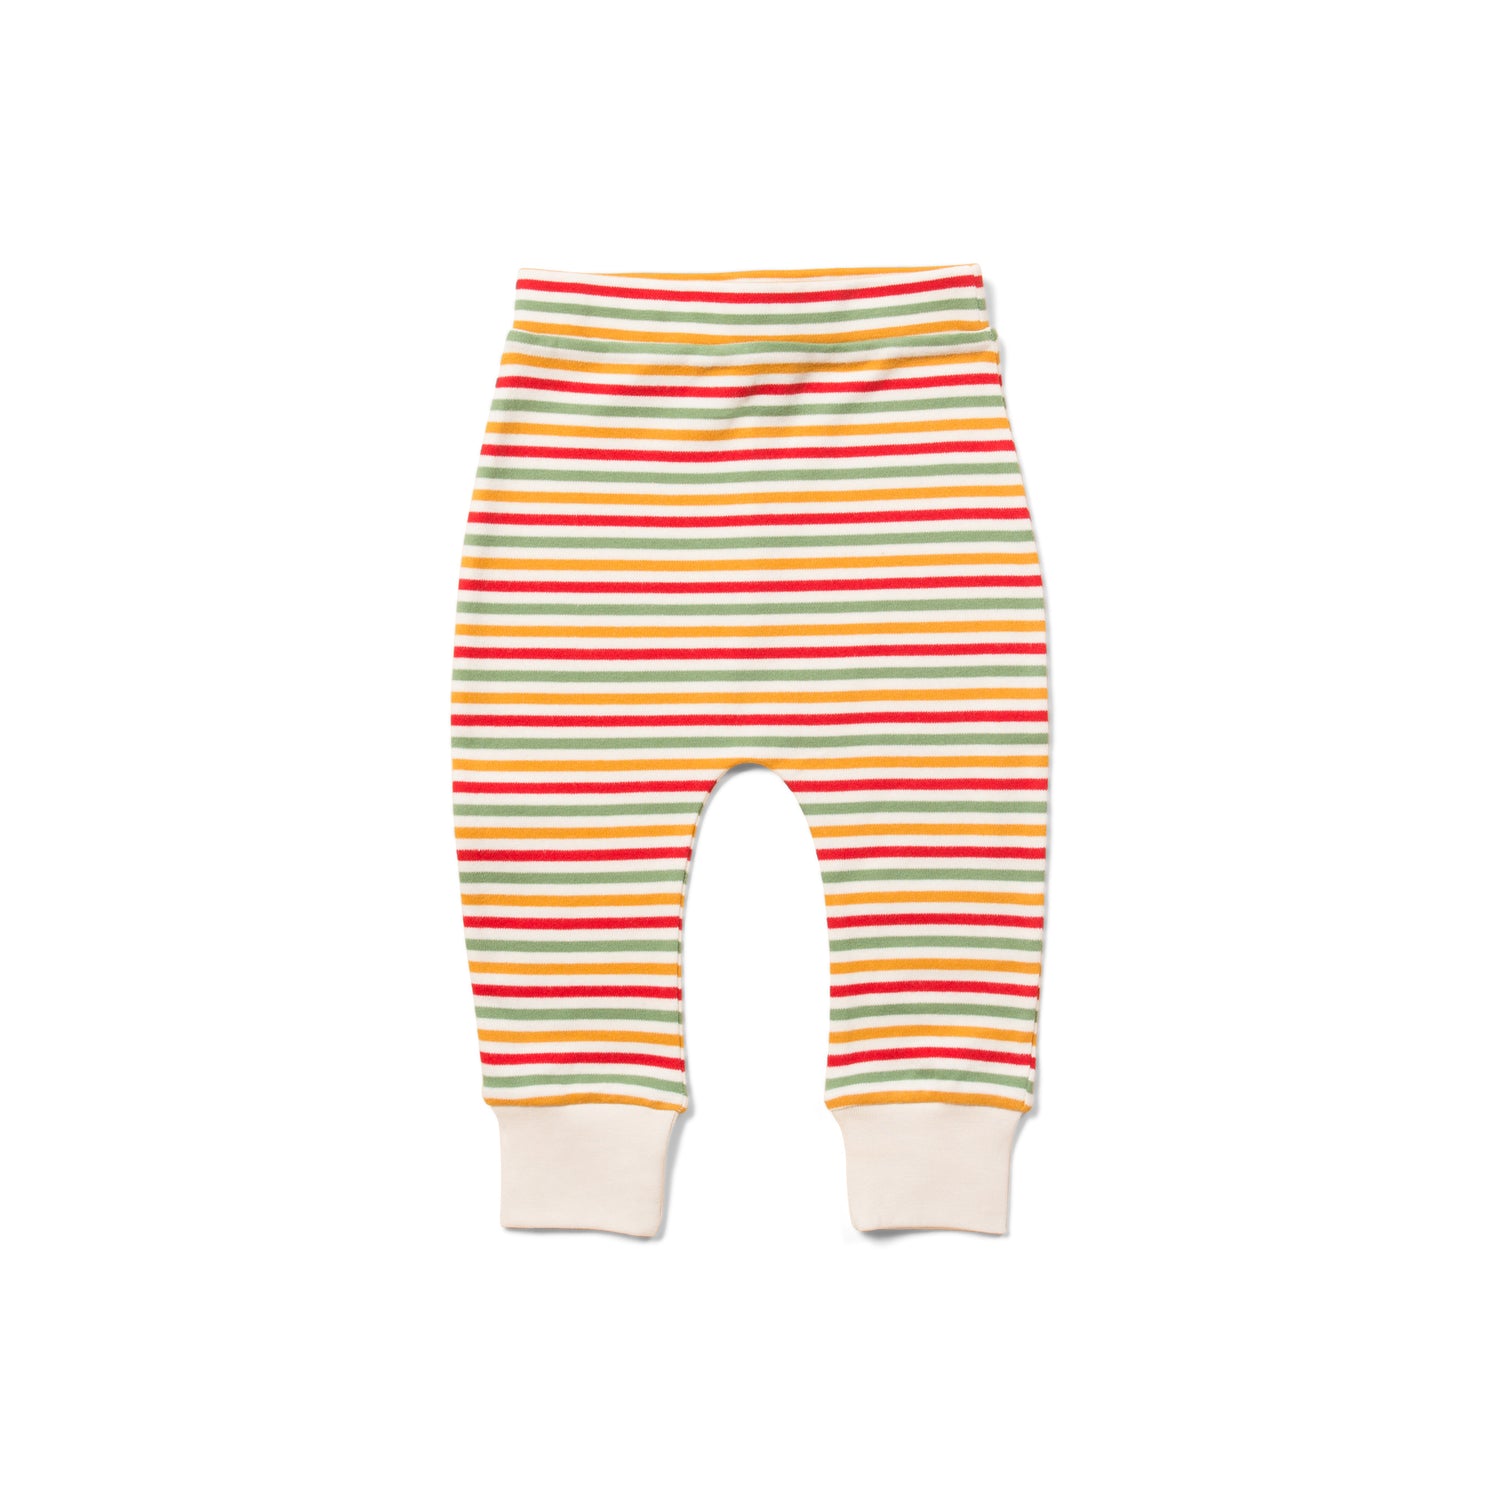 Weather for ducks playset joggers